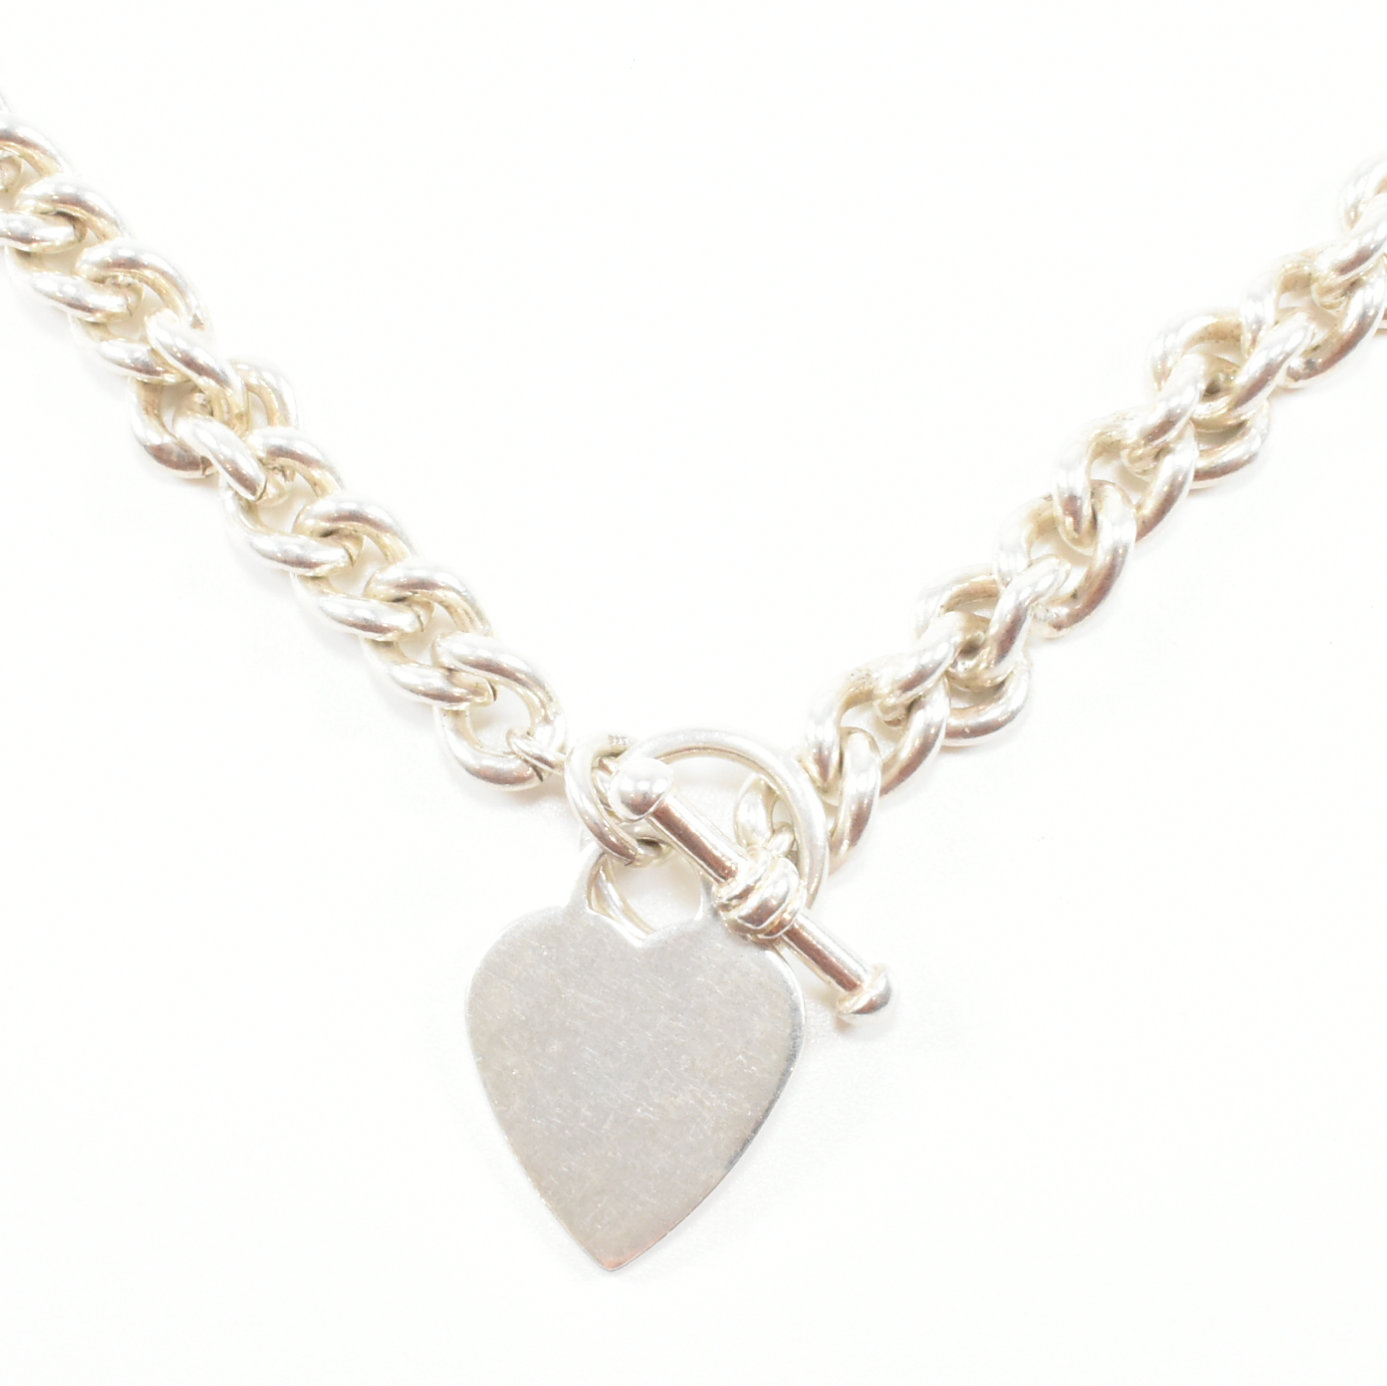 CONTEMPORARY 925 SILVER T BAR CURB LINK CHAIN & HEART PENDANT - Image 4 of 5